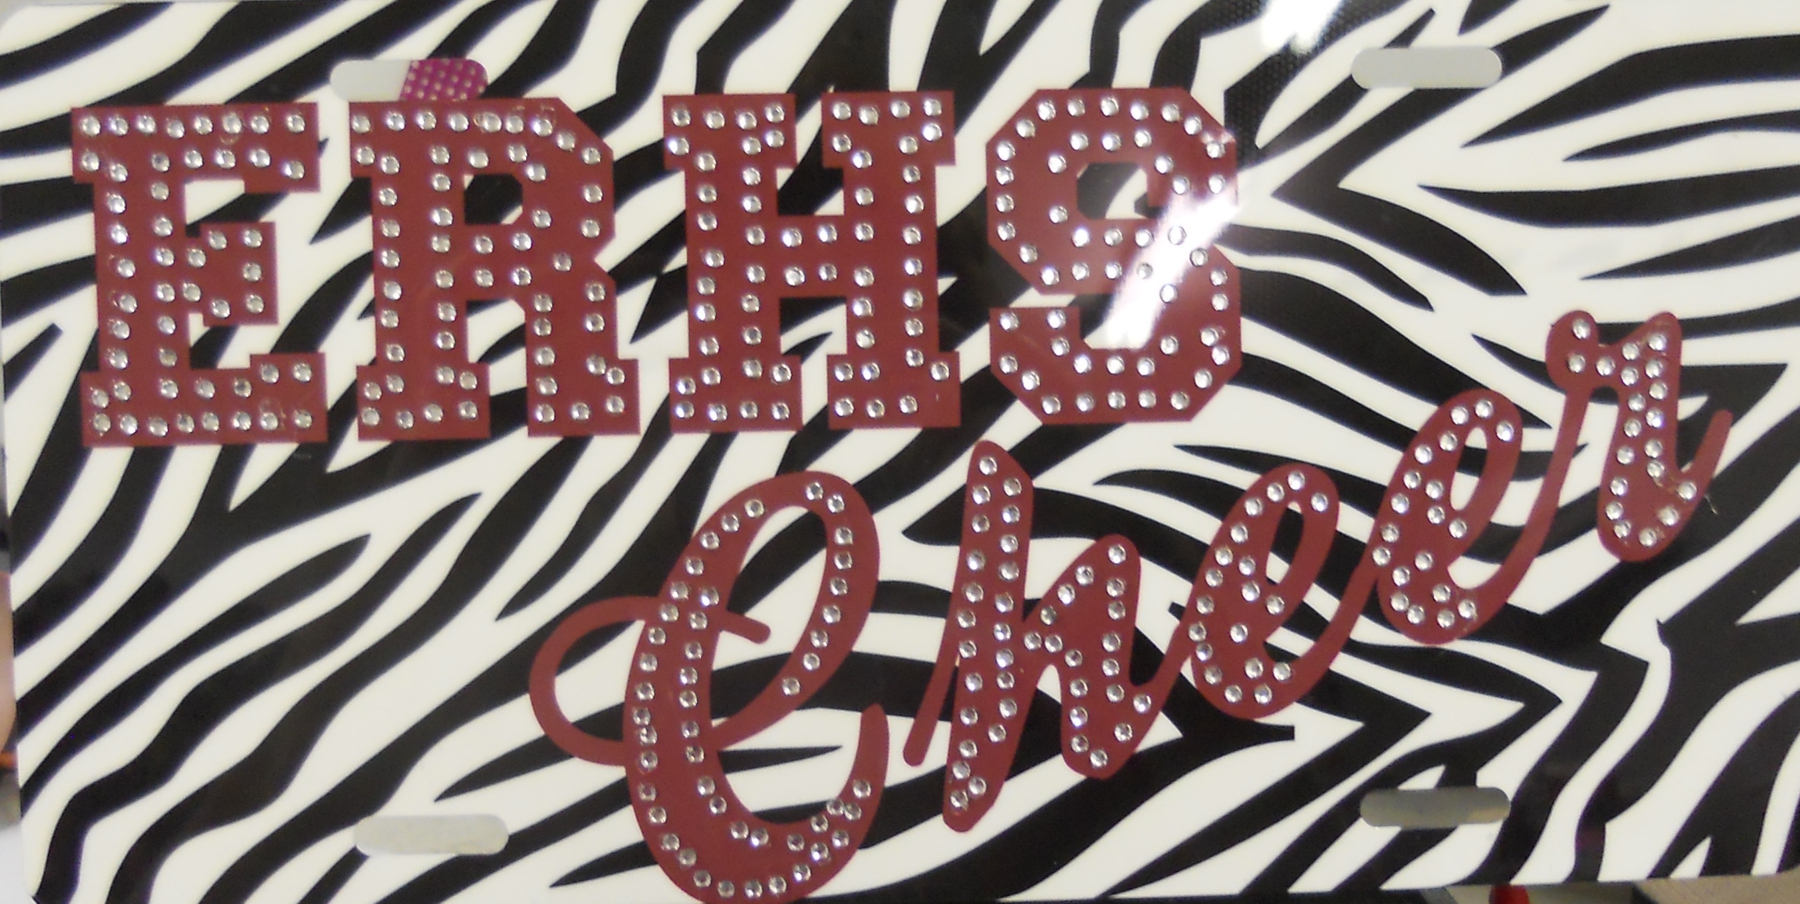 Zebra Print ERHS Cheer made with sublimation printing